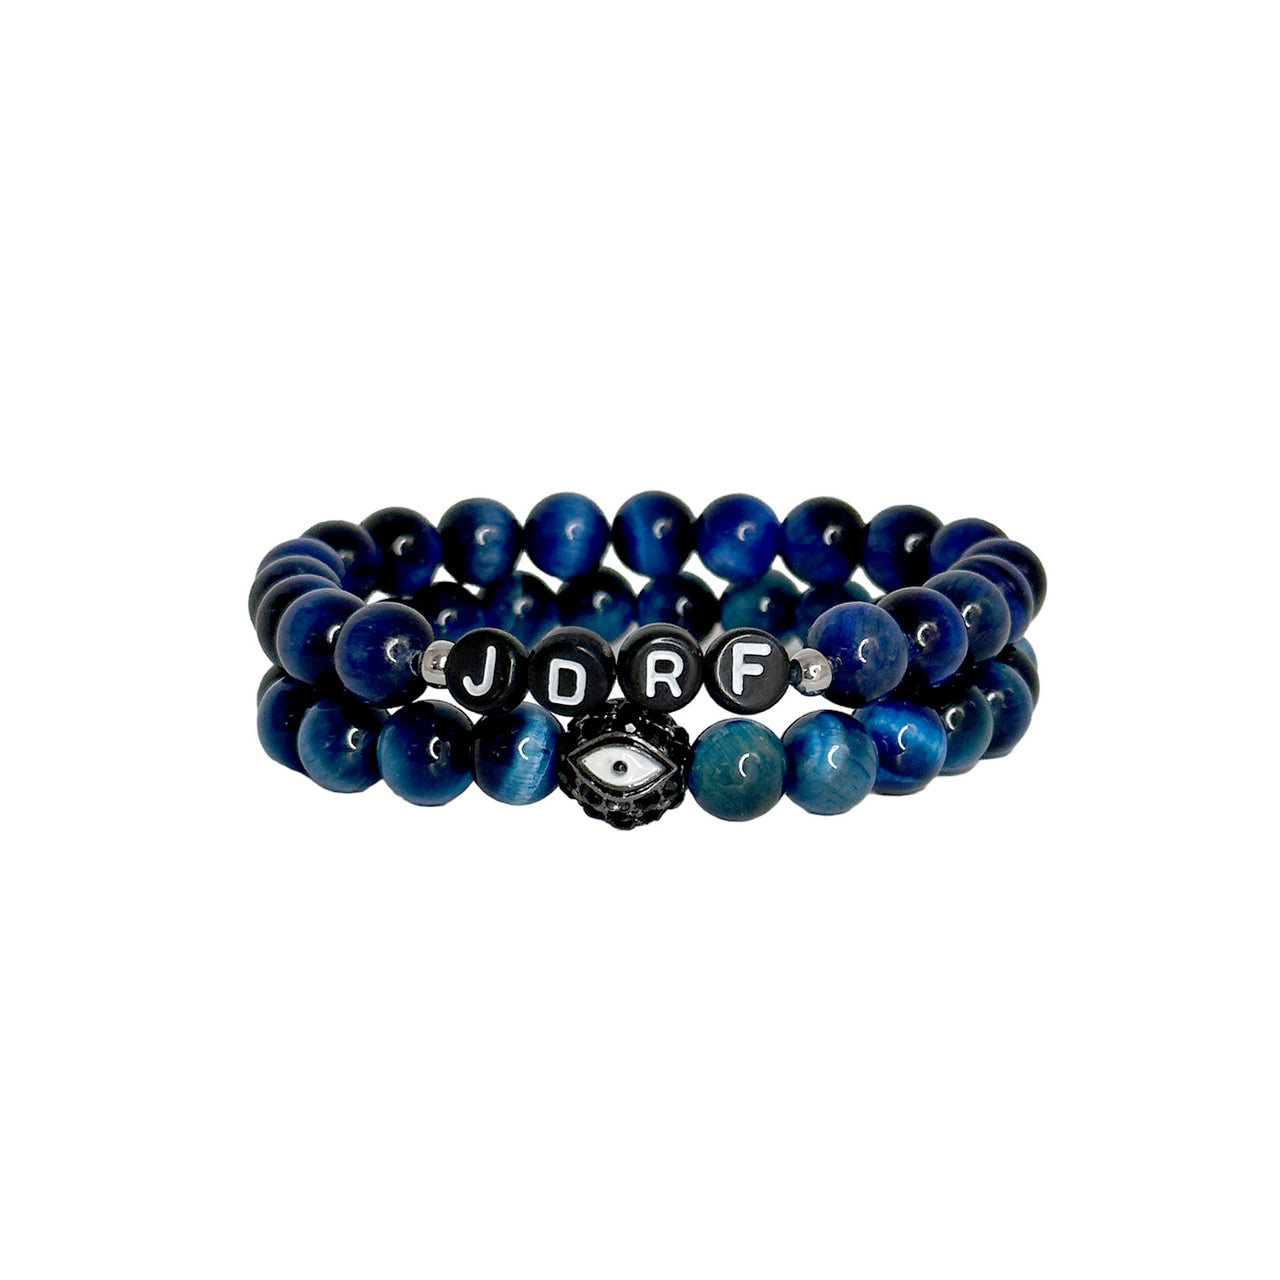 Marco JDRF Protection Bracelet Collection